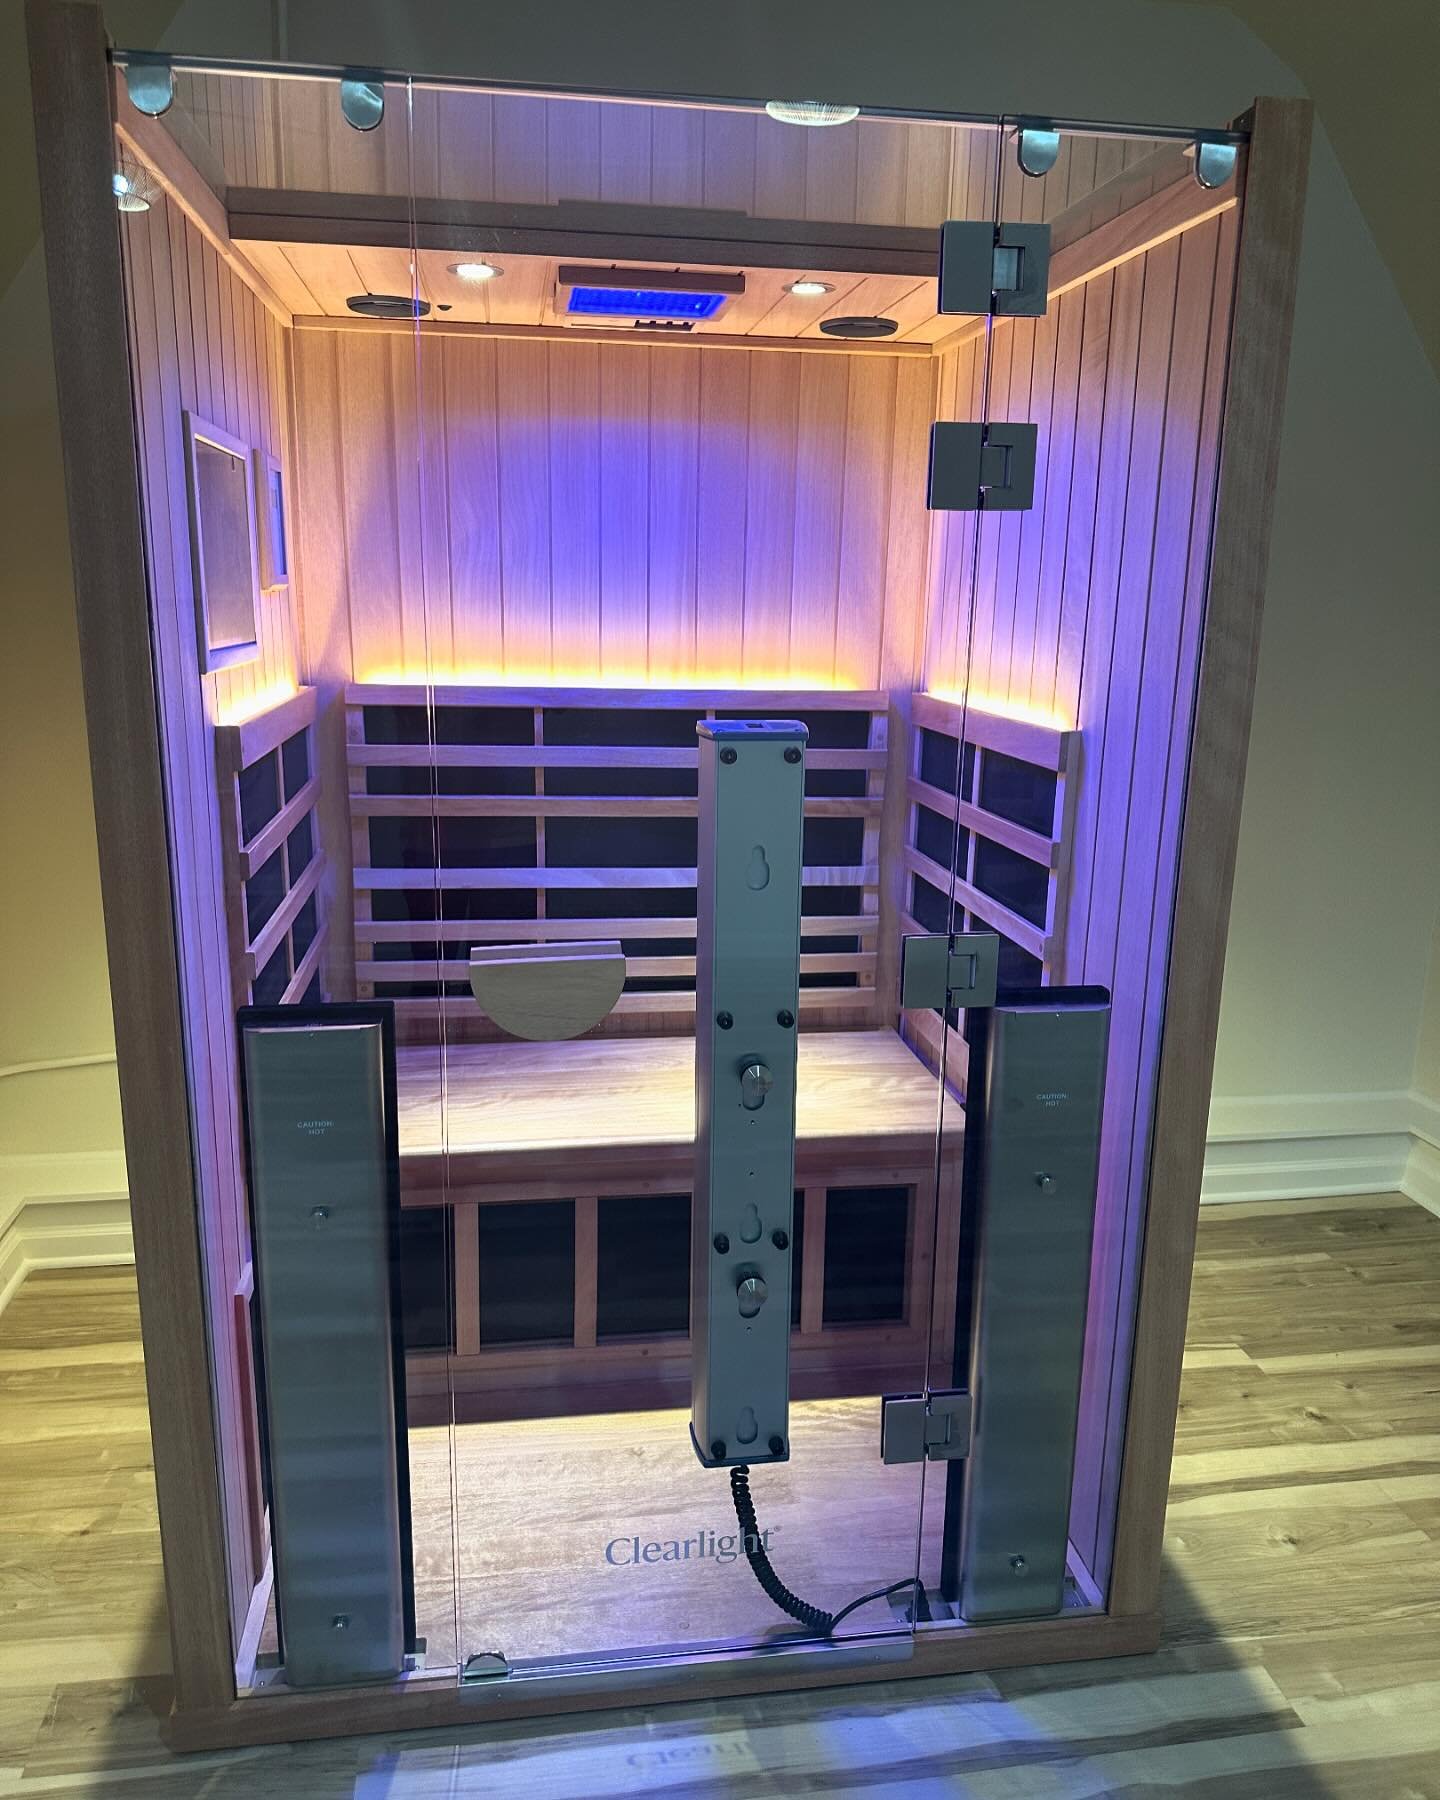 Now offering infrared sauna sessions! Add an infrared sauna session to your massage today! For more info please visit our website at Harmonyfalls.net